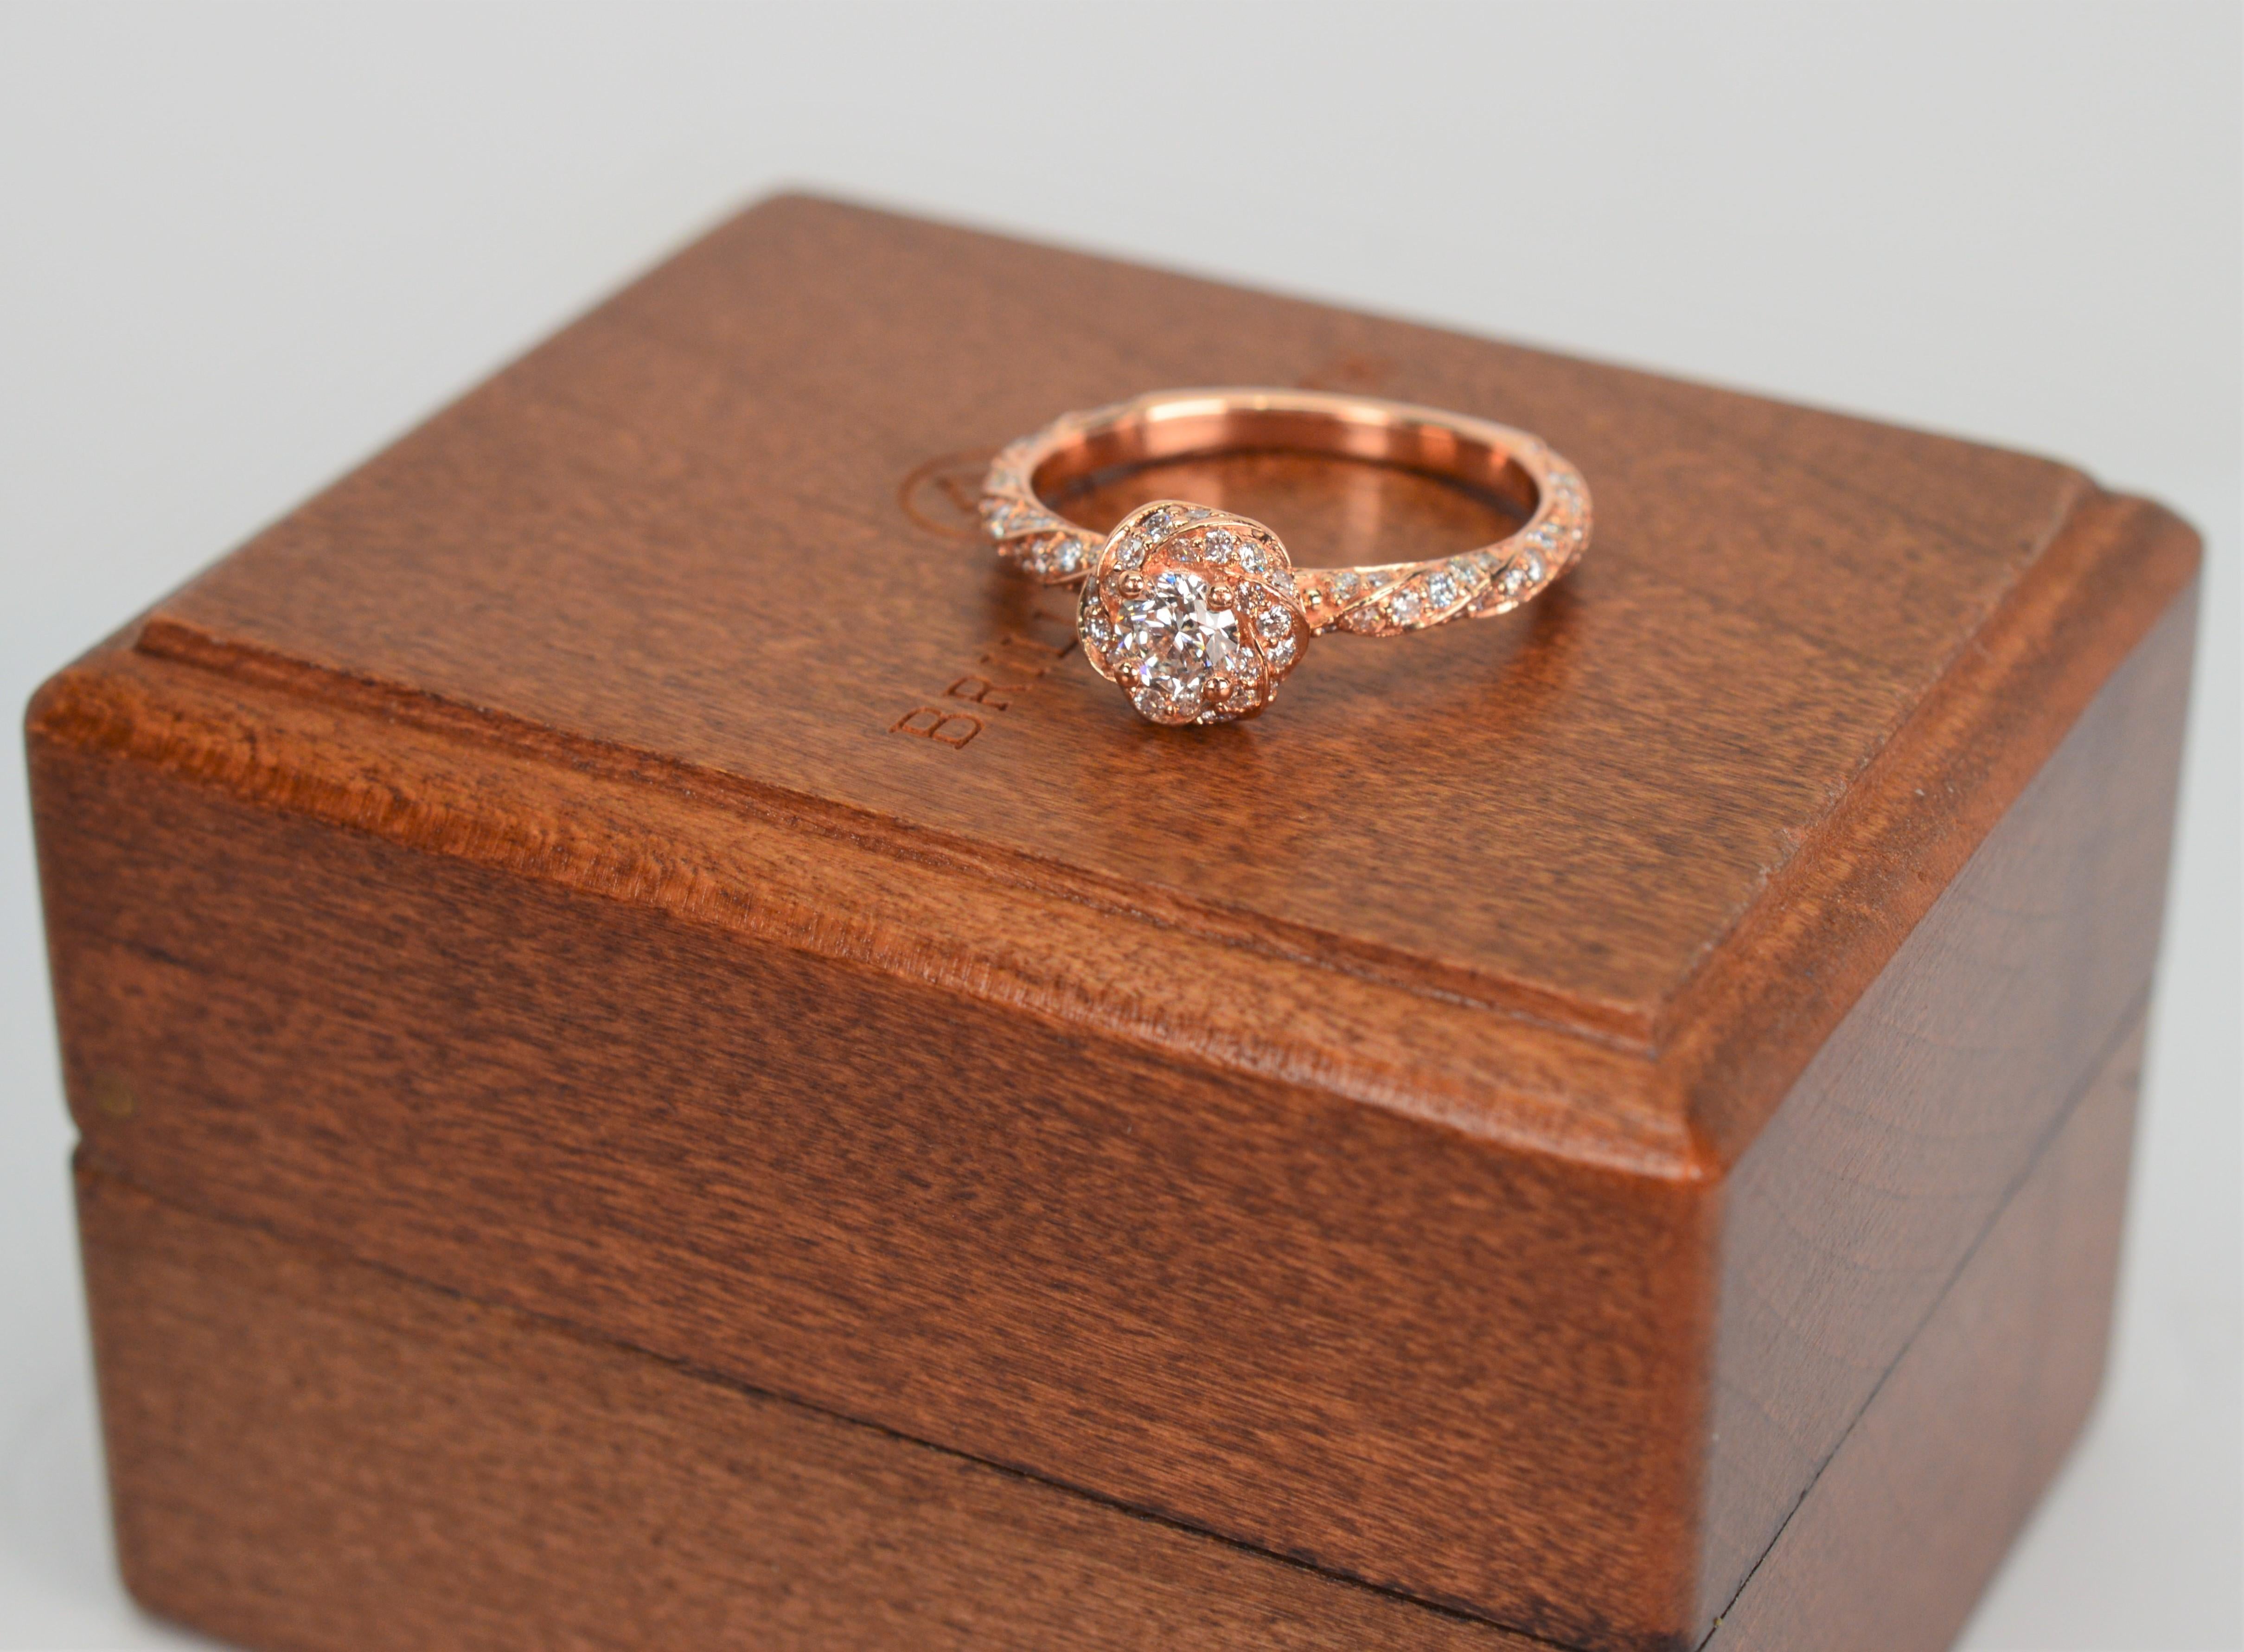 Brilliant Earth Diamond 14 Karat Rose Gold Engagement Ring w GIA Cert Box Papers For Sale 2